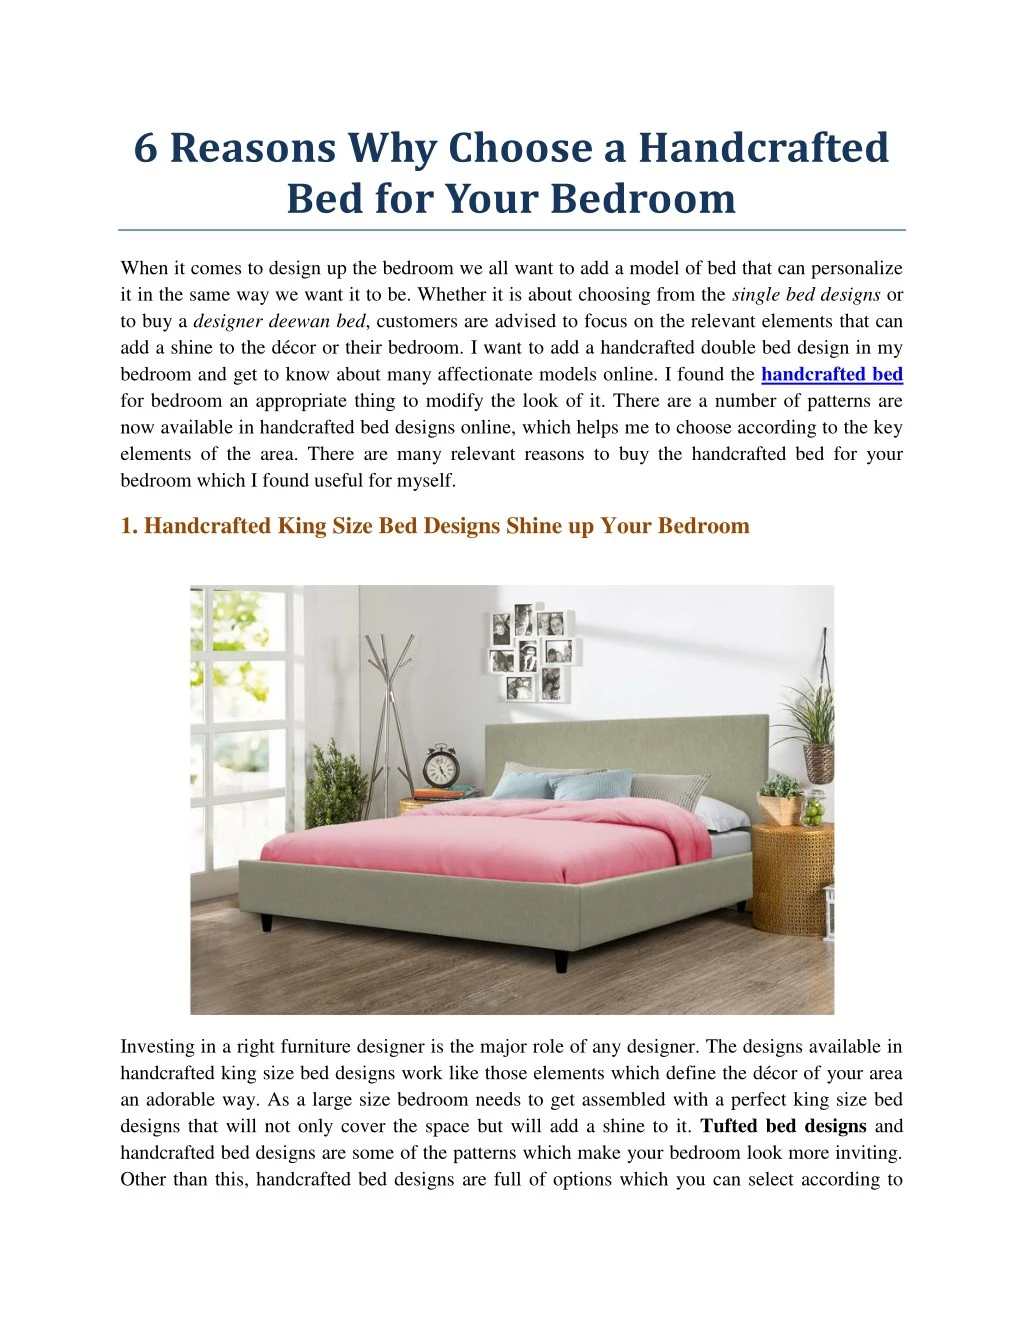 6 reasons why choose a handcrafted bed for your